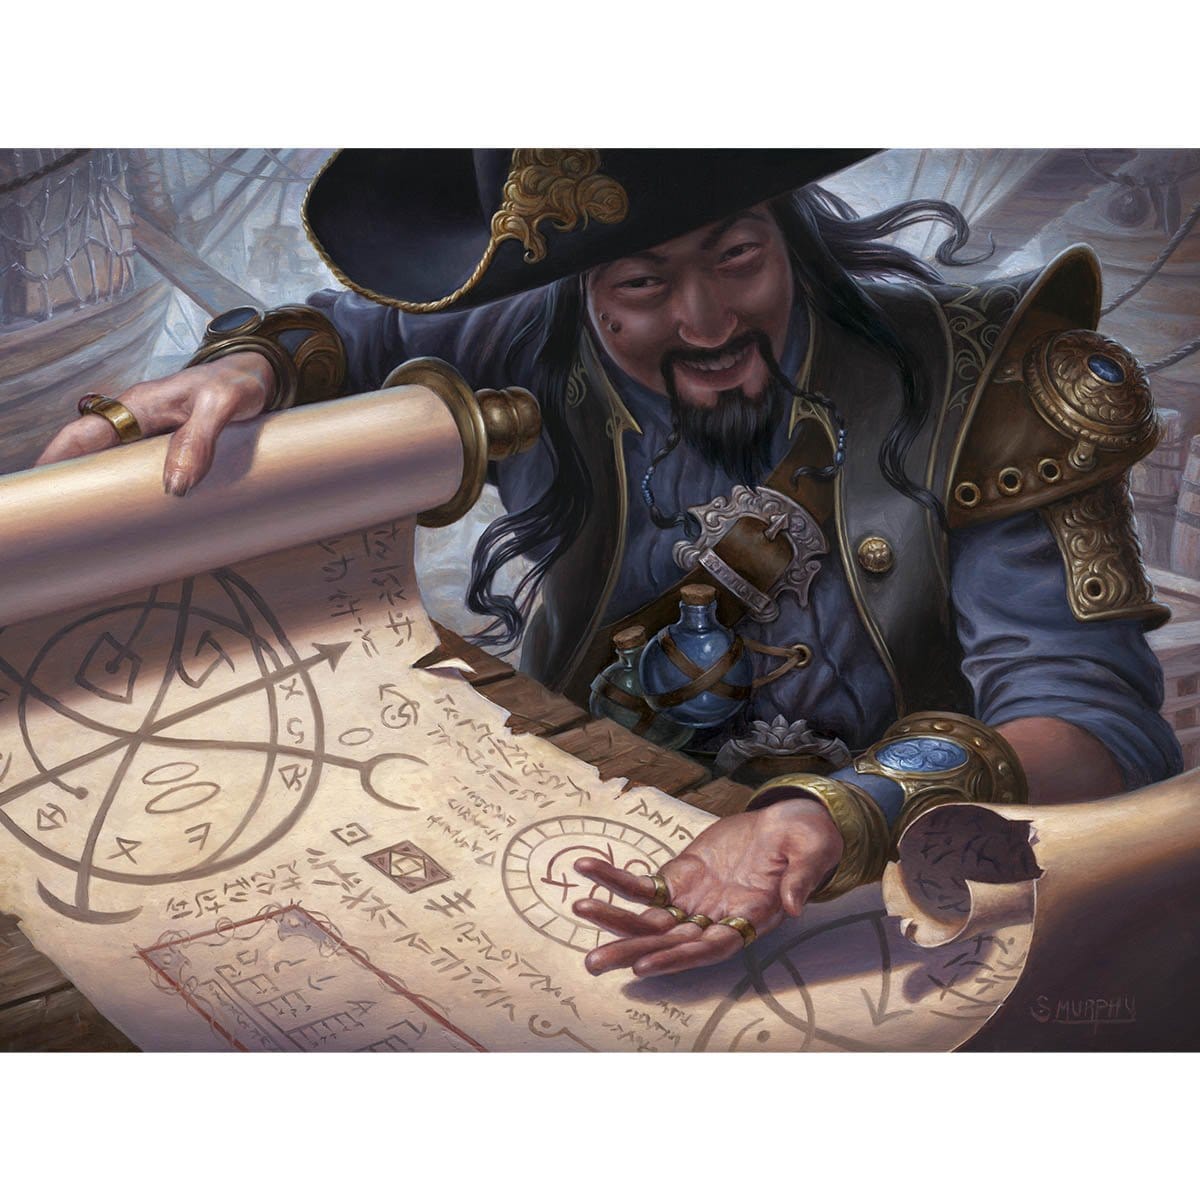 Merchant Scroll Print - Print - Original Magic Art - Accessories for Magic the Gathering and other card games